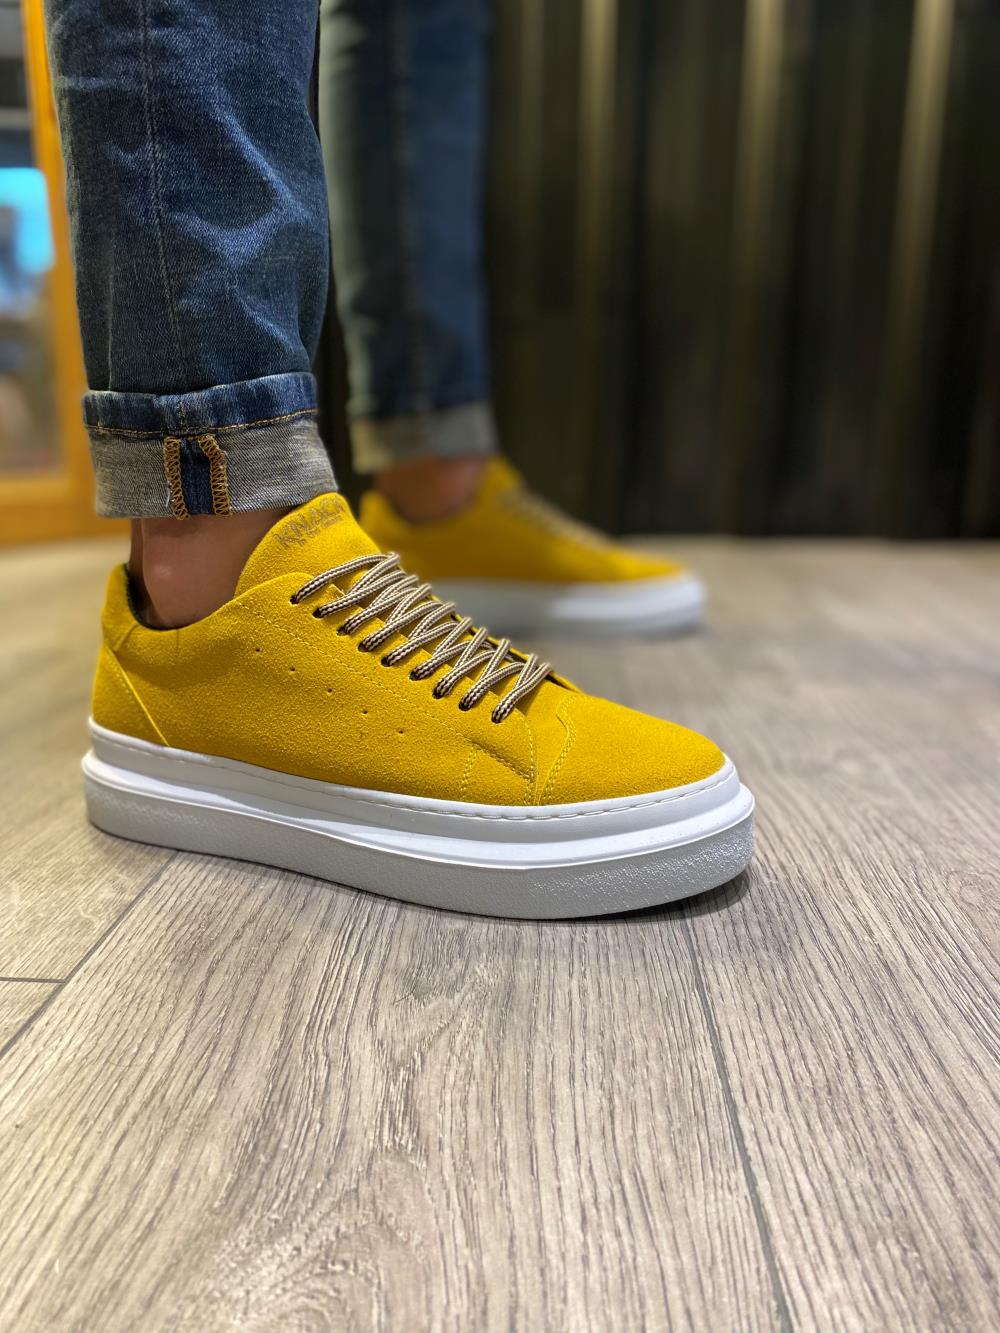 STM Men's Casual Sneakers Shoes 421 Yellow - STREETMODE ™